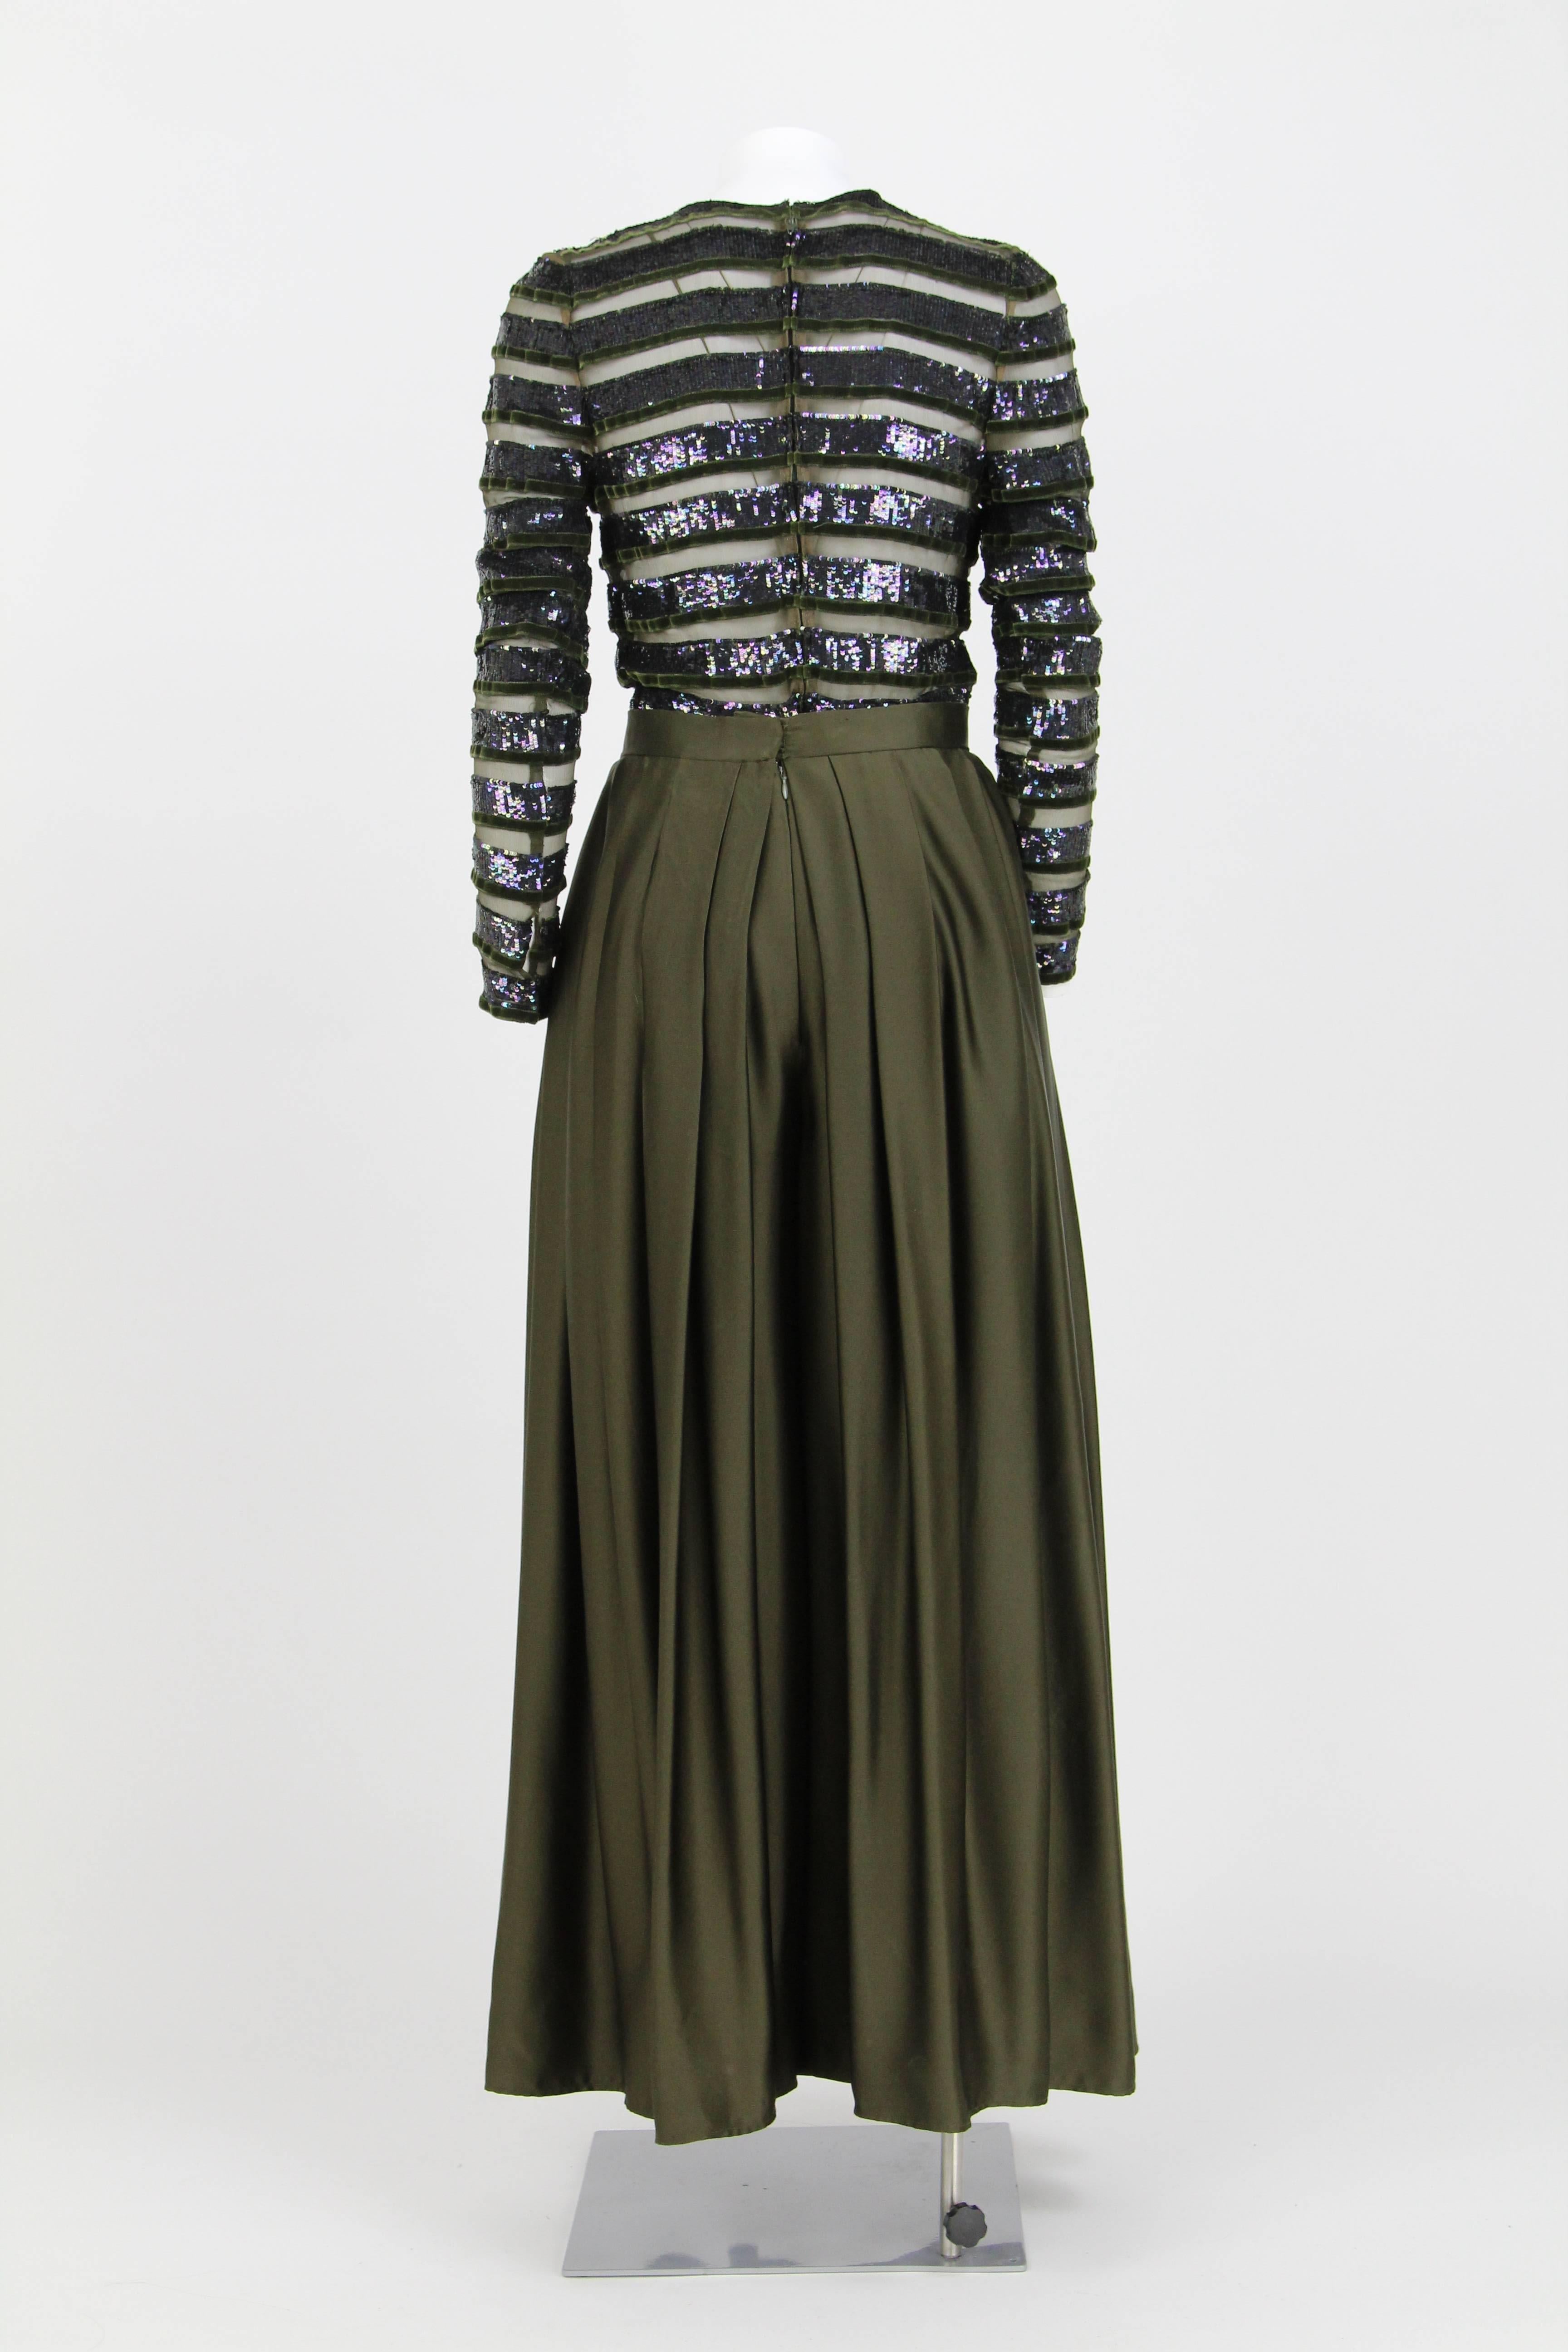 Oscar De La Renta dark green suit composed by top and trousers. Top with sequins, in semi-transparent fabric and velvet. Round neckline and long sleeves. Pleated high-waisted trousers with a wide cut.

Size: 40 IT

Flat measurements
Top
Height: 56